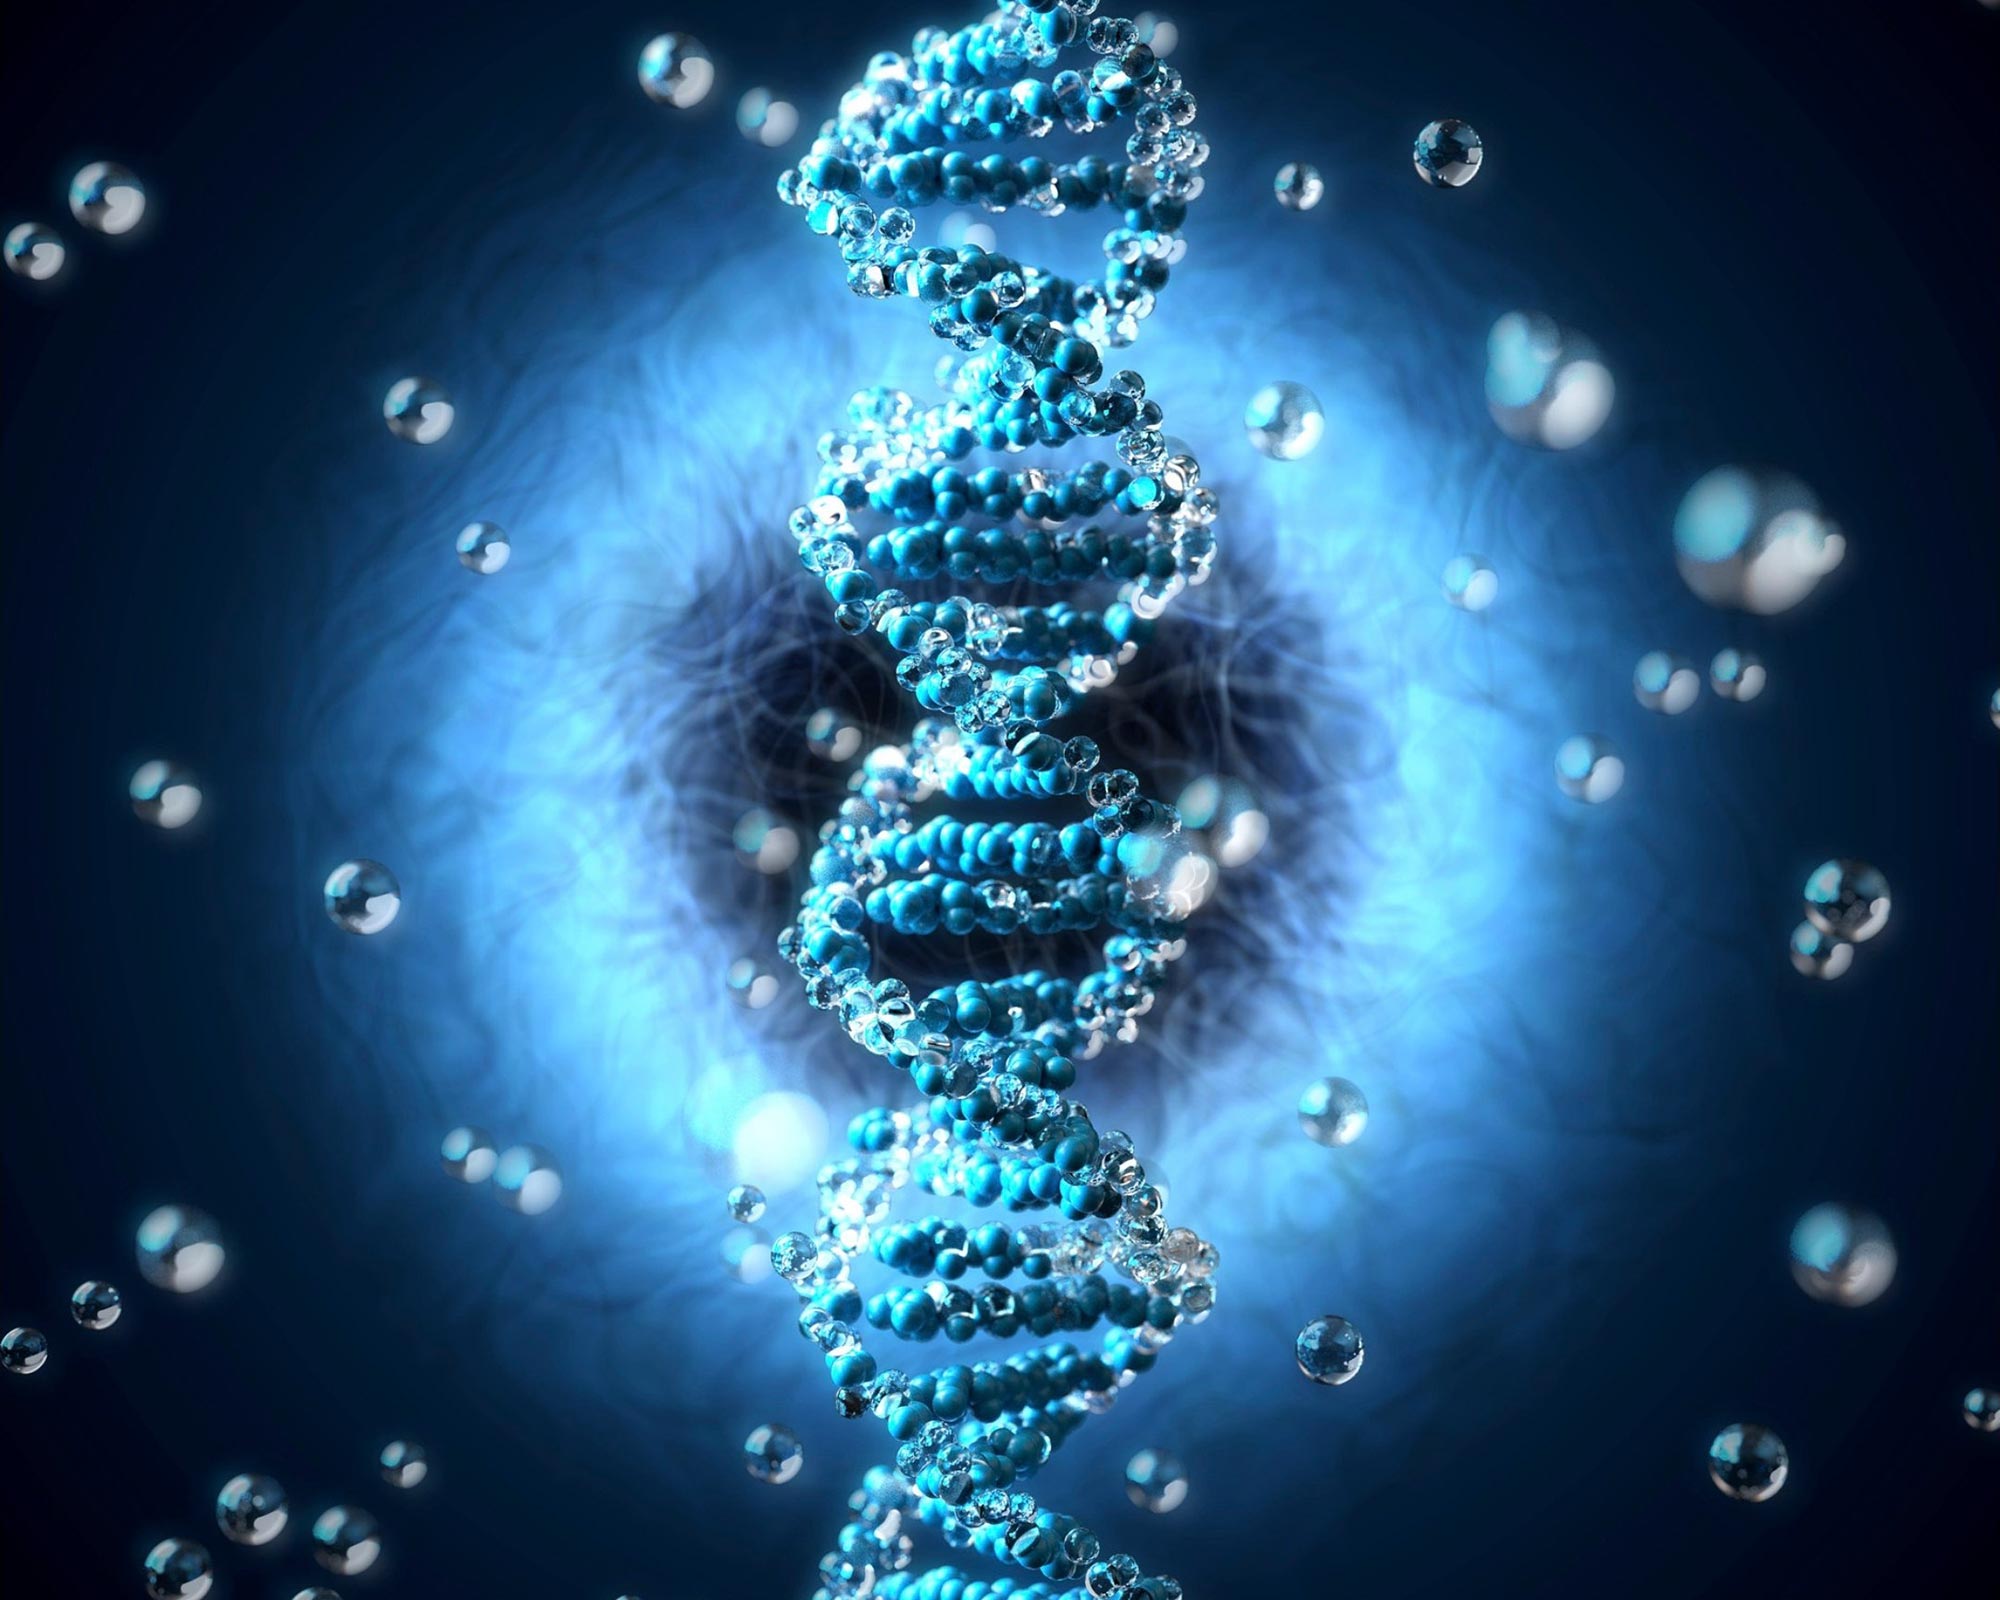 New Technology Exposes the Evolutionary Weak Spots of the Human Genome